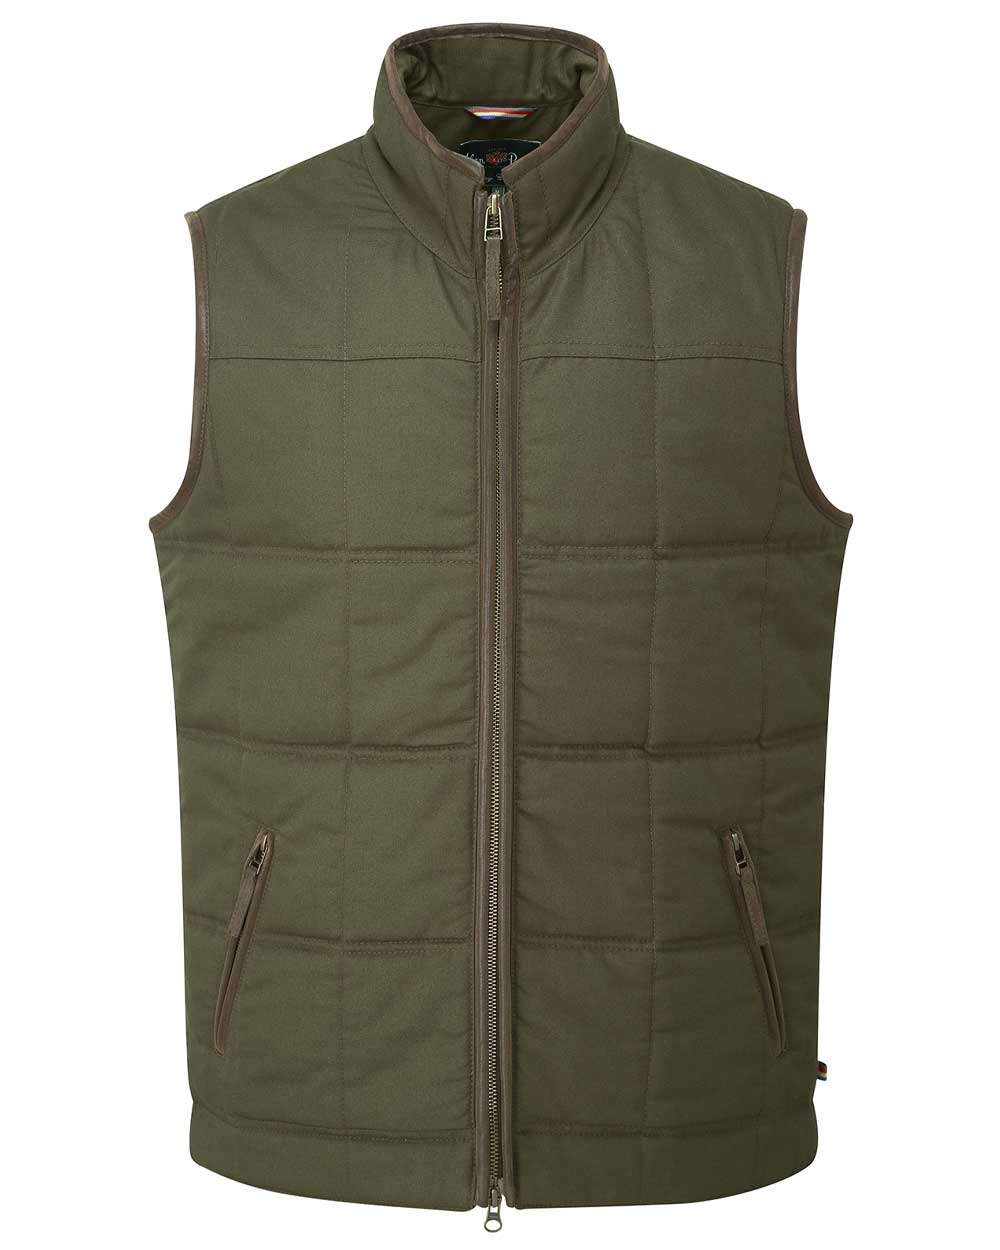 Alan Paine Kexby Waistcoat in Olive 